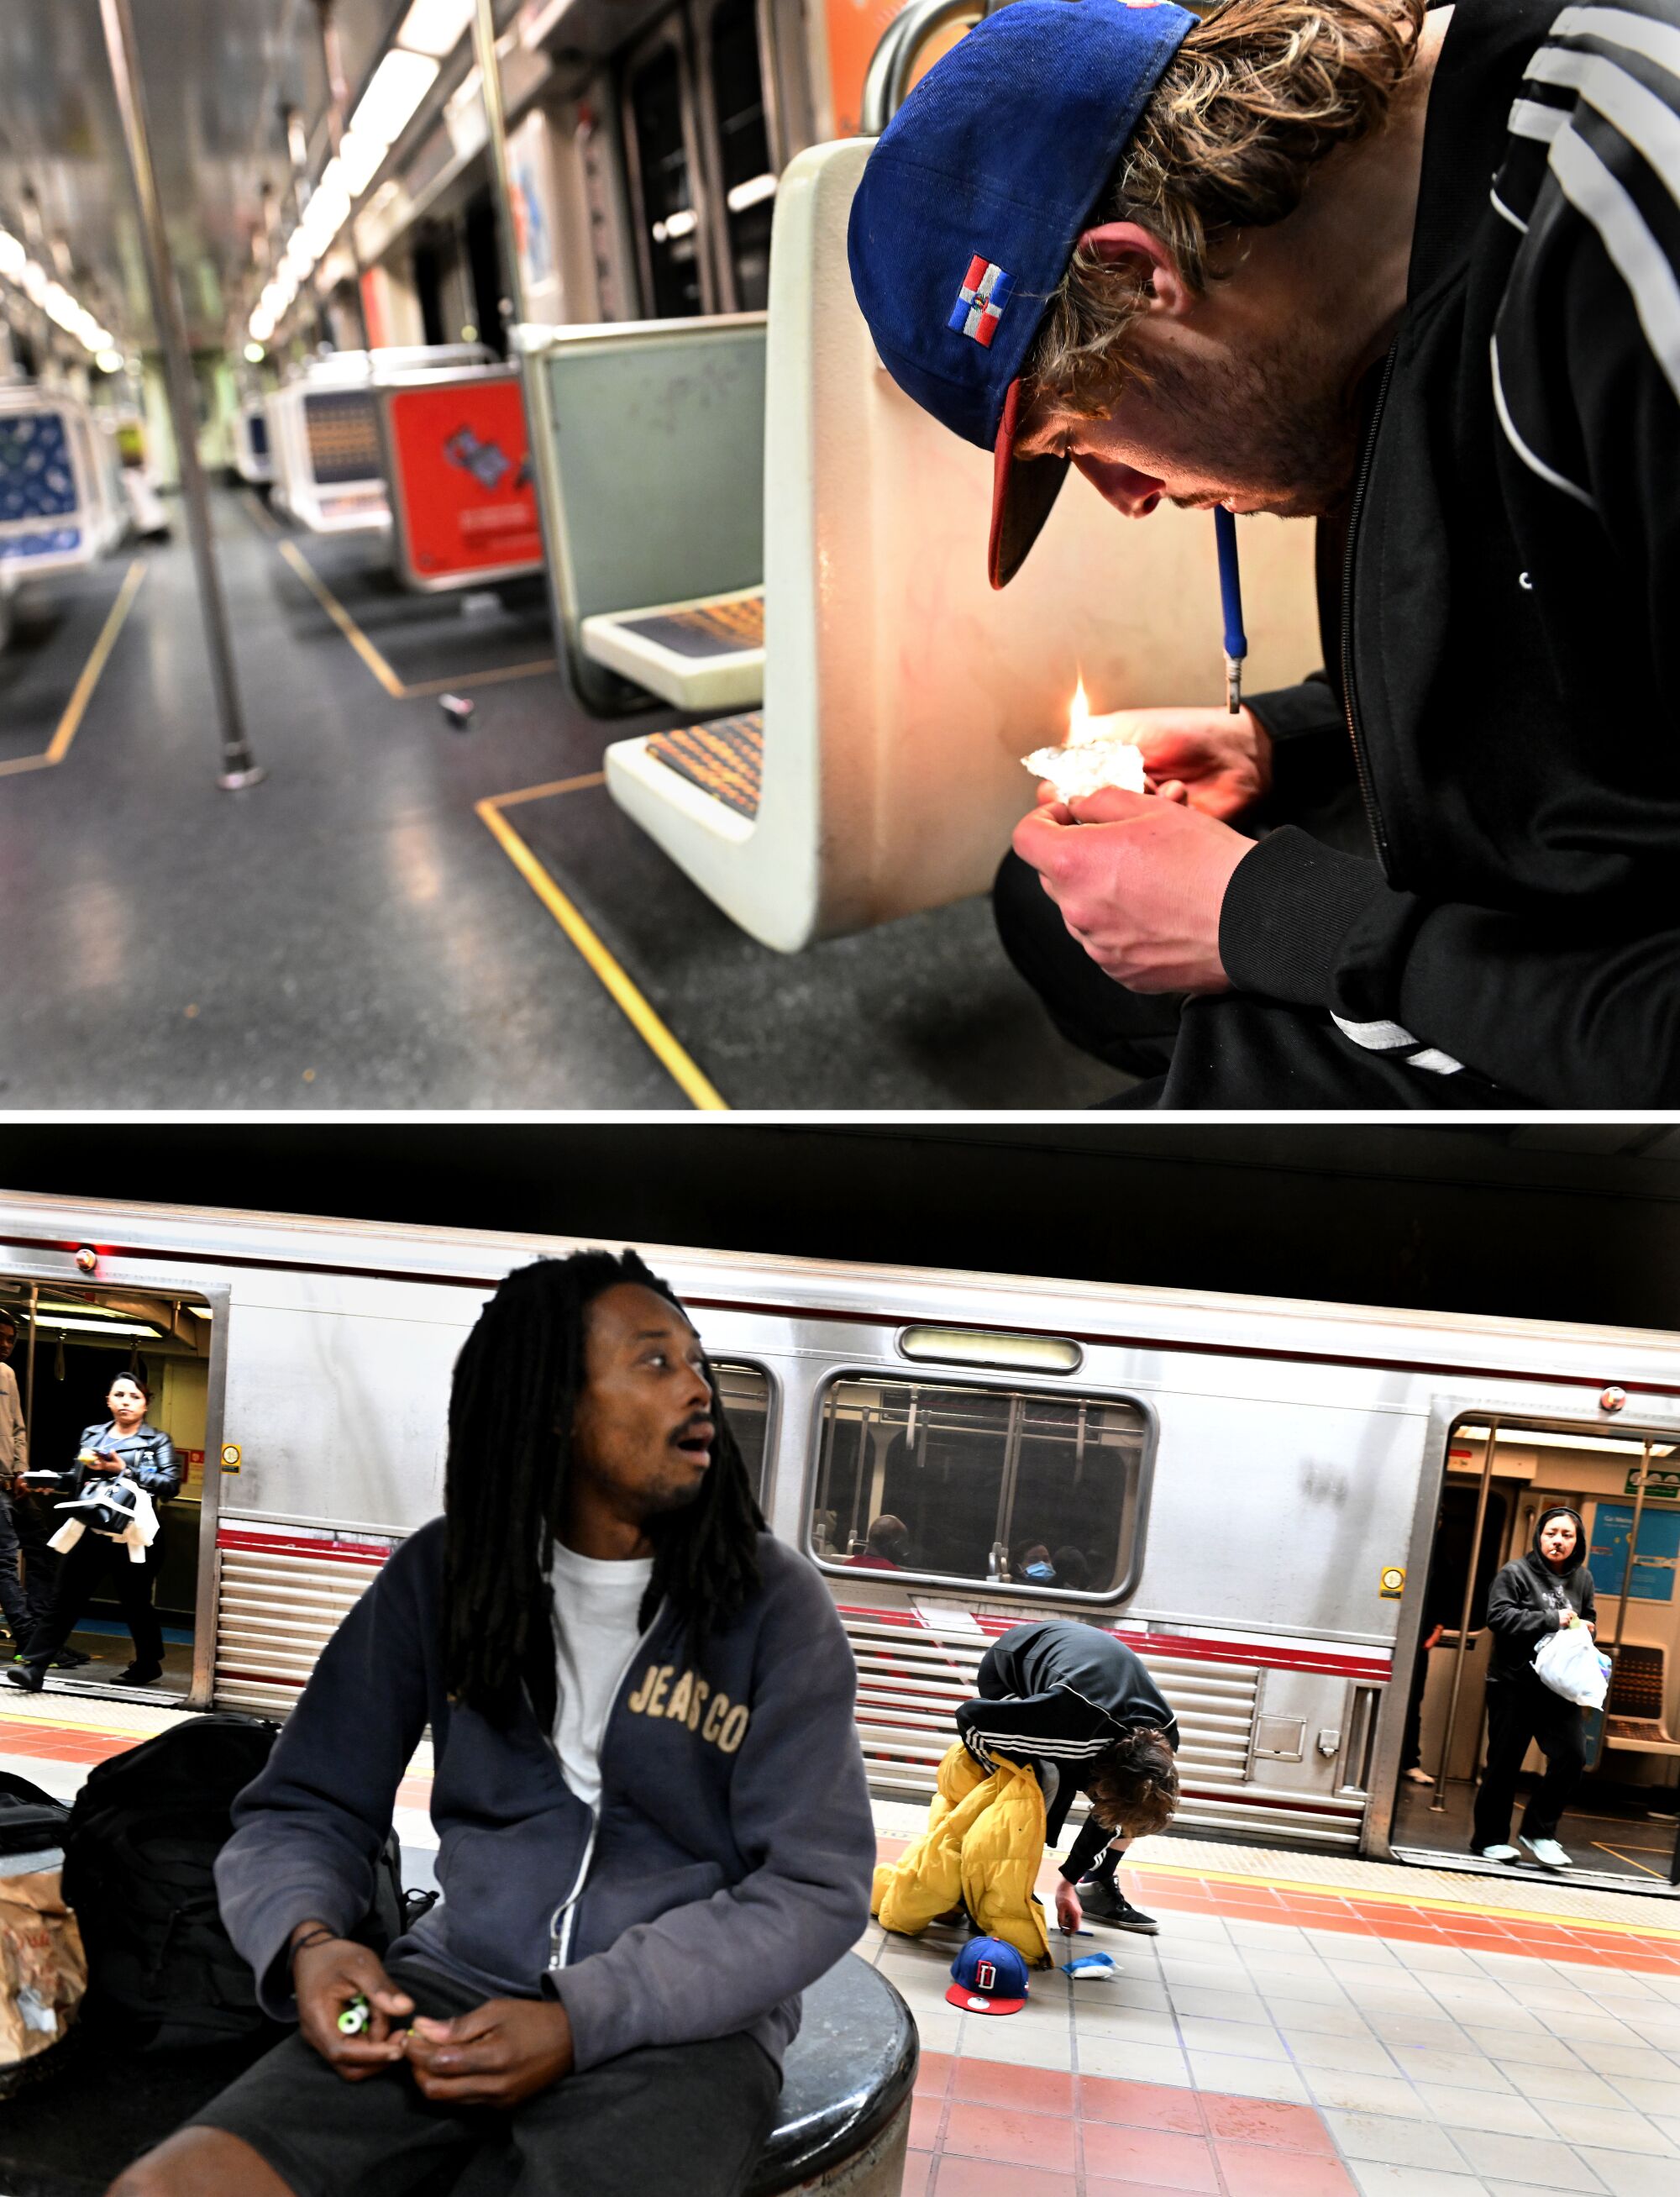 In the top image, a young man smokes a substance on an aluminum foil.  And below, a man sits on a subway bench as the train arrives